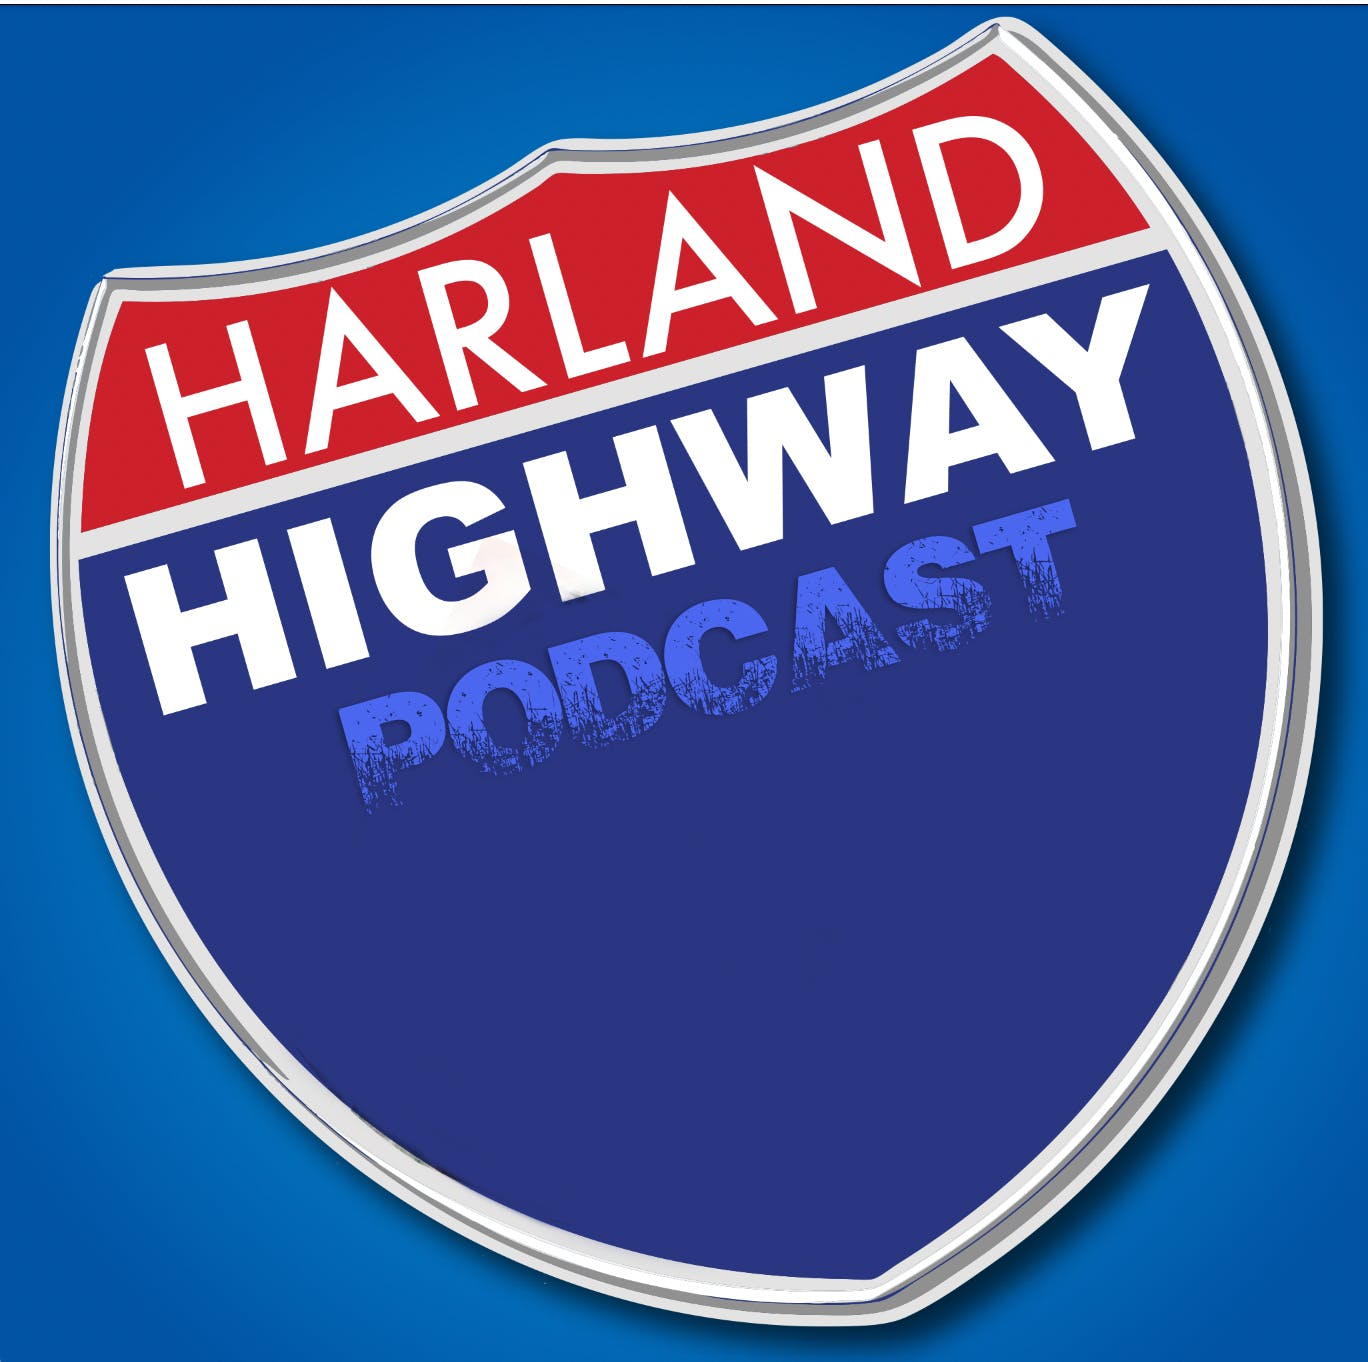 NEW HARLAND HIGHWAY #26 - HARLAND WILLIAMS, Comedian, Podcaster